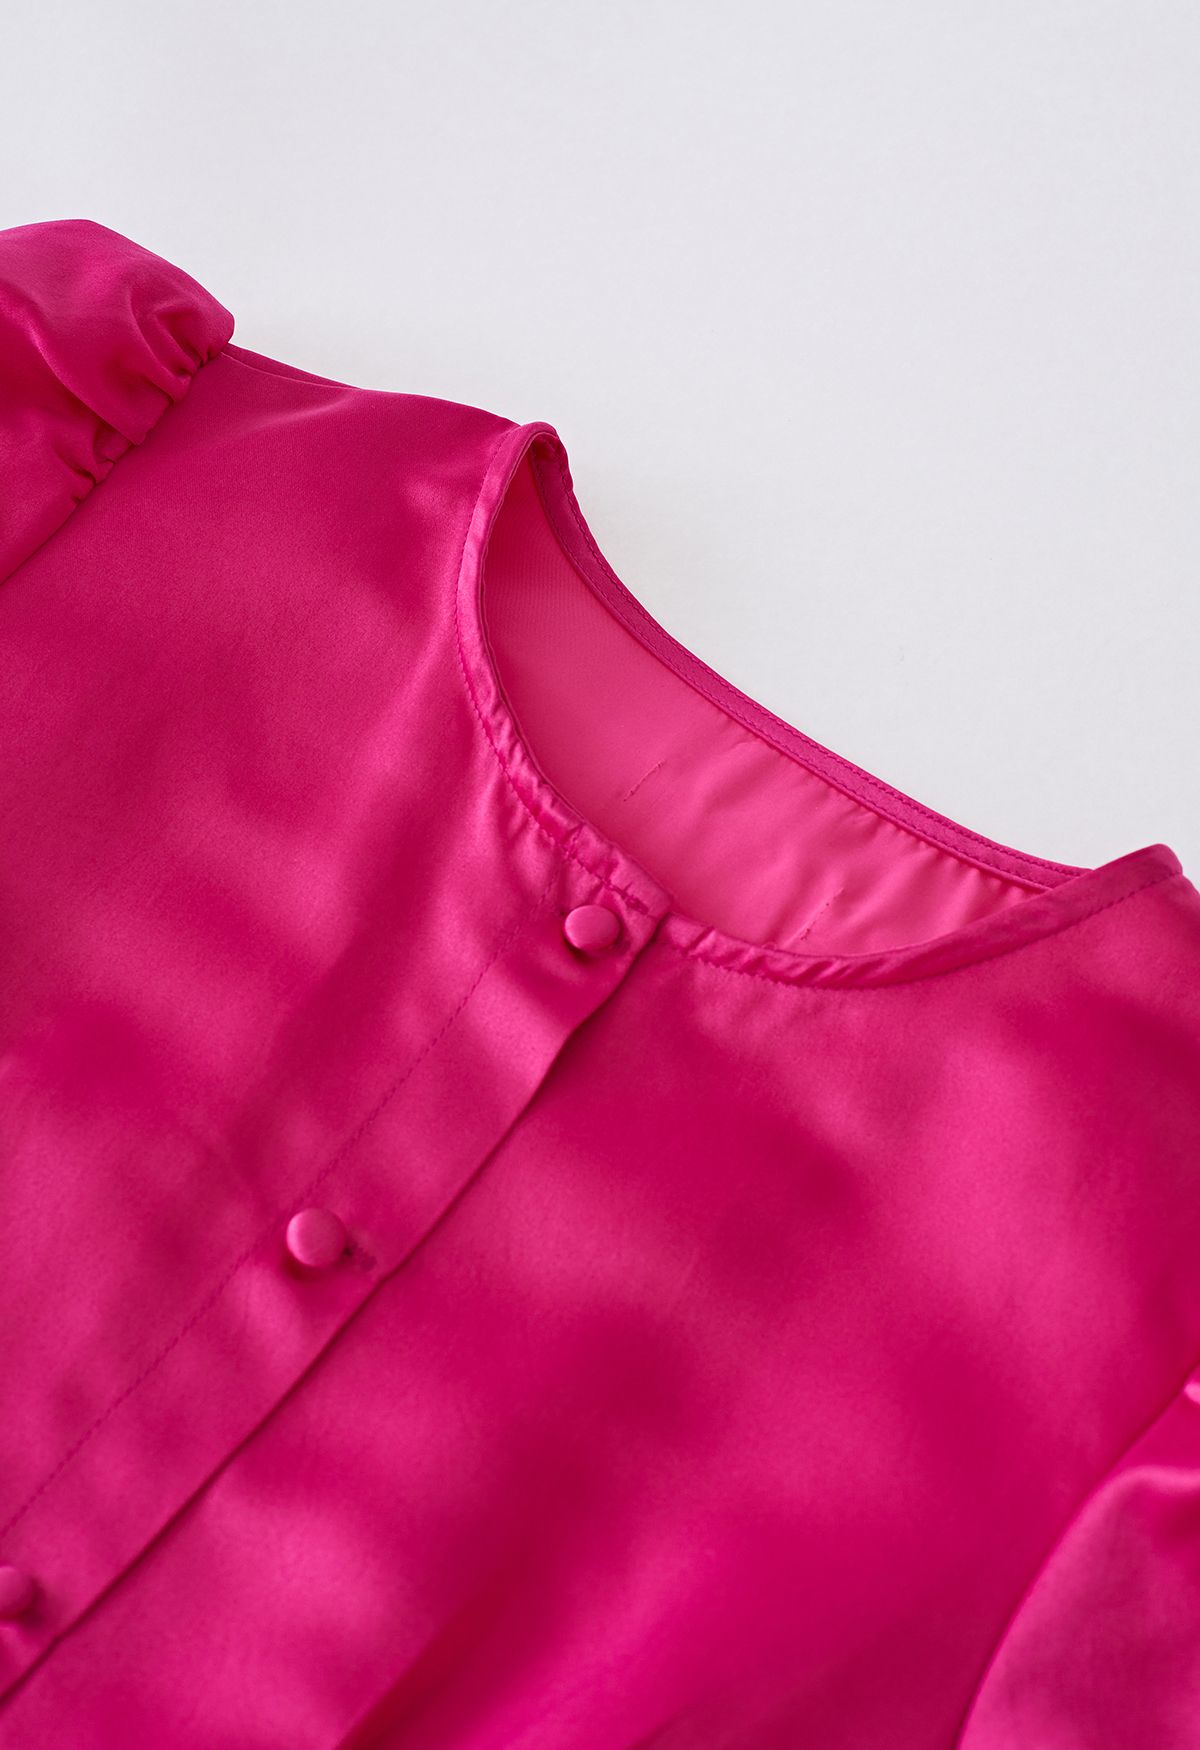 Glossy Satin Button Down Midi Dress in Hot Pink